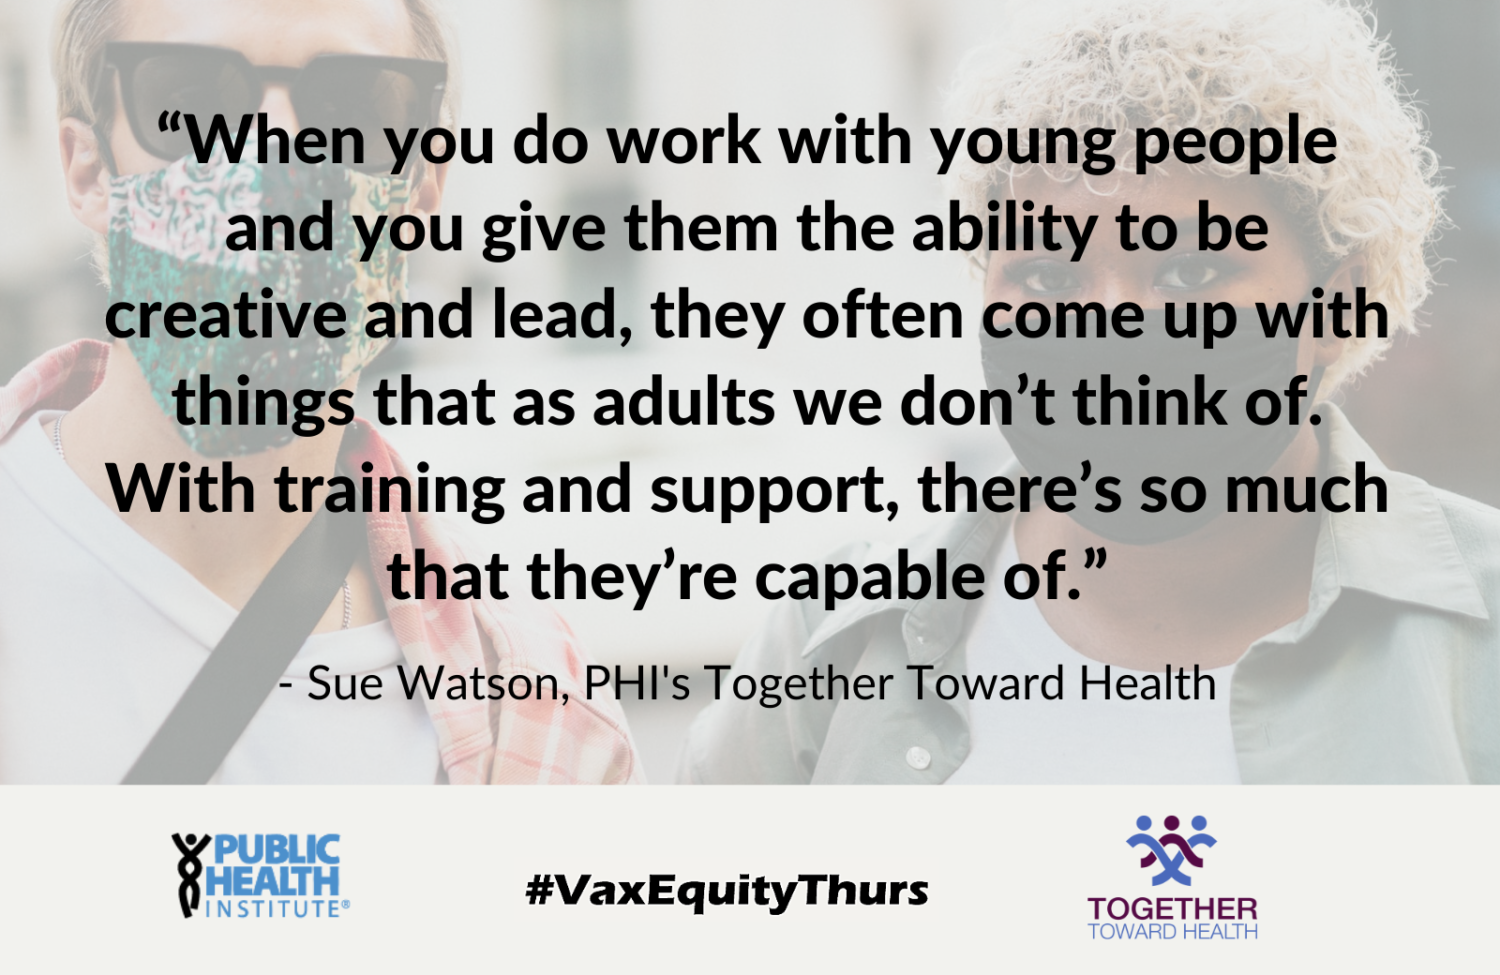 “When you do work with young people and you give them the ability to be creative and lead, they often come up with things that as adults we don’t think of. With training and support, there’s so much that they’re capable of.” - Sue Watson, PHI's Together Toward Health